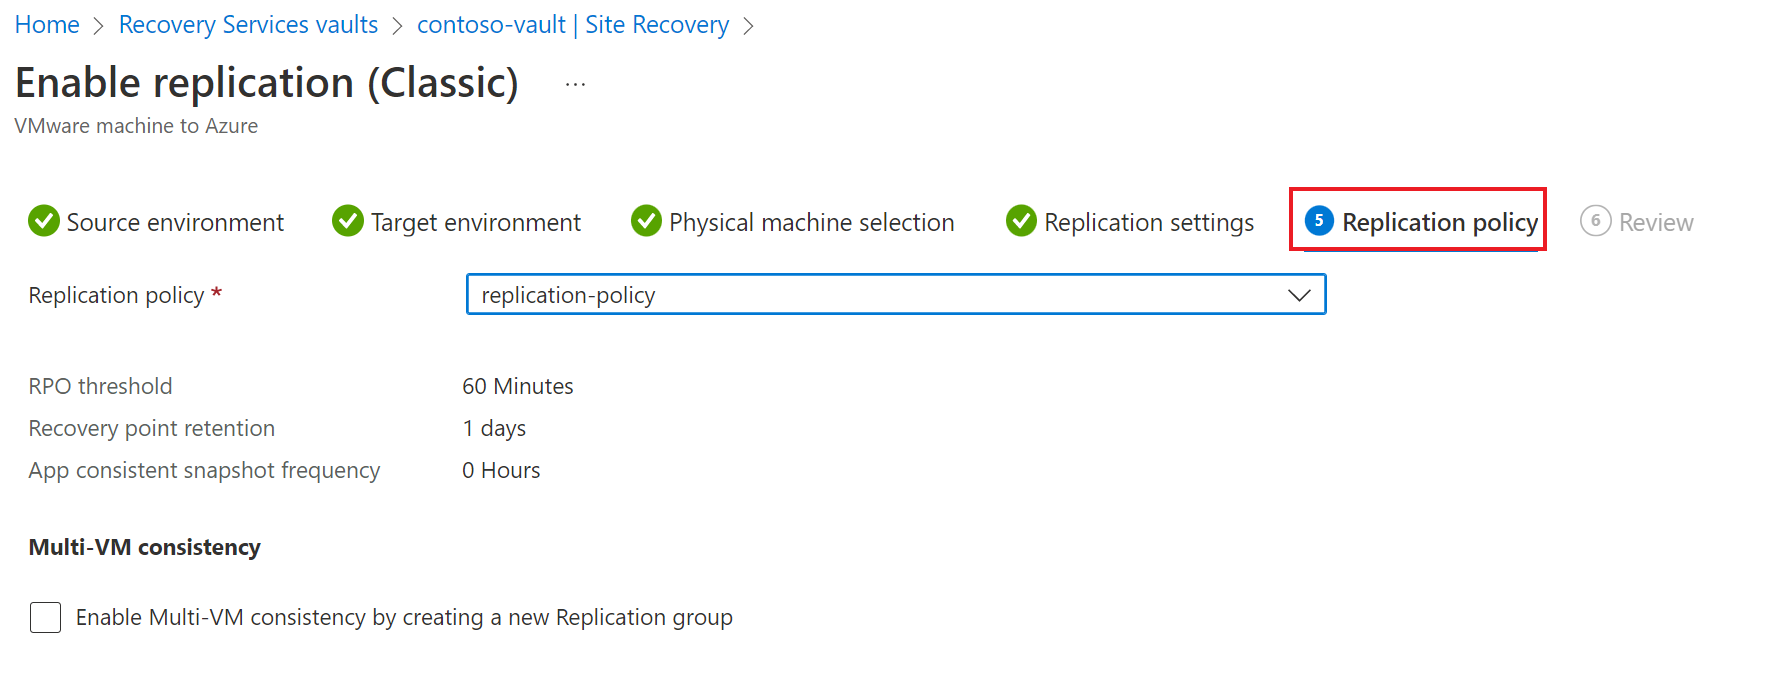 Screenshot of enable replication policy page.